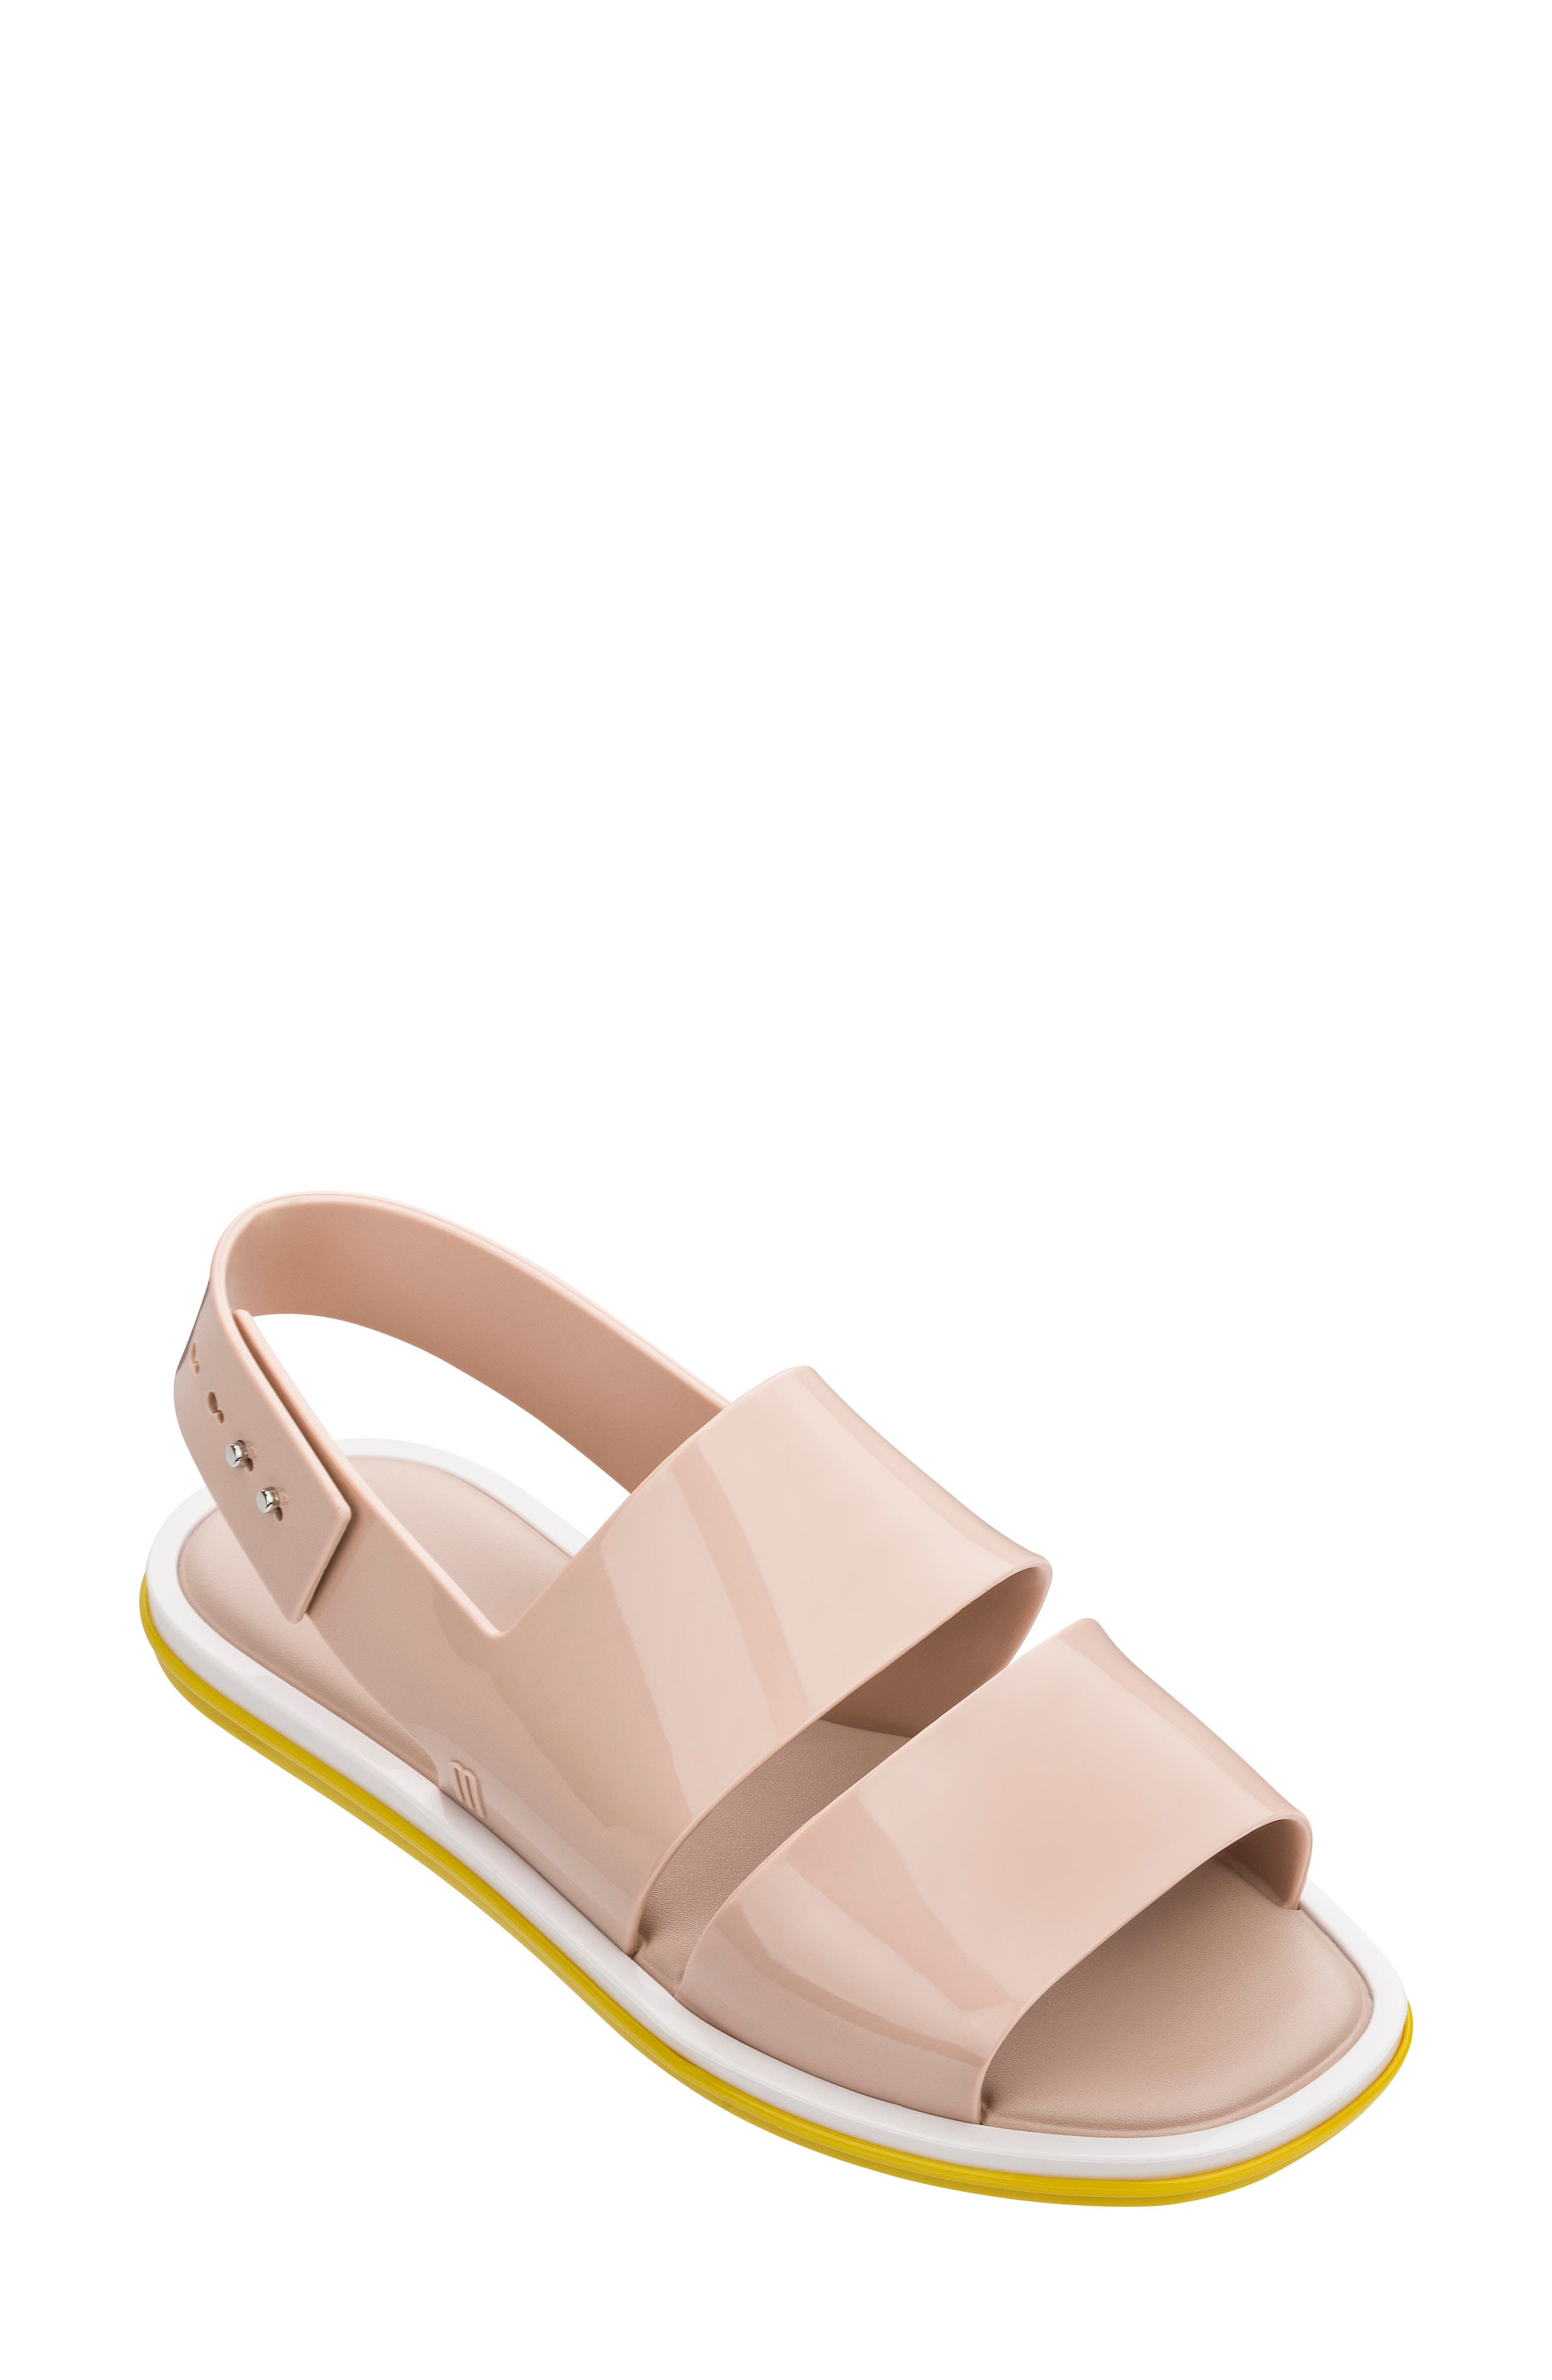 Melissa Carbon Ad Slingback Flat Sandal In Yellow/pin